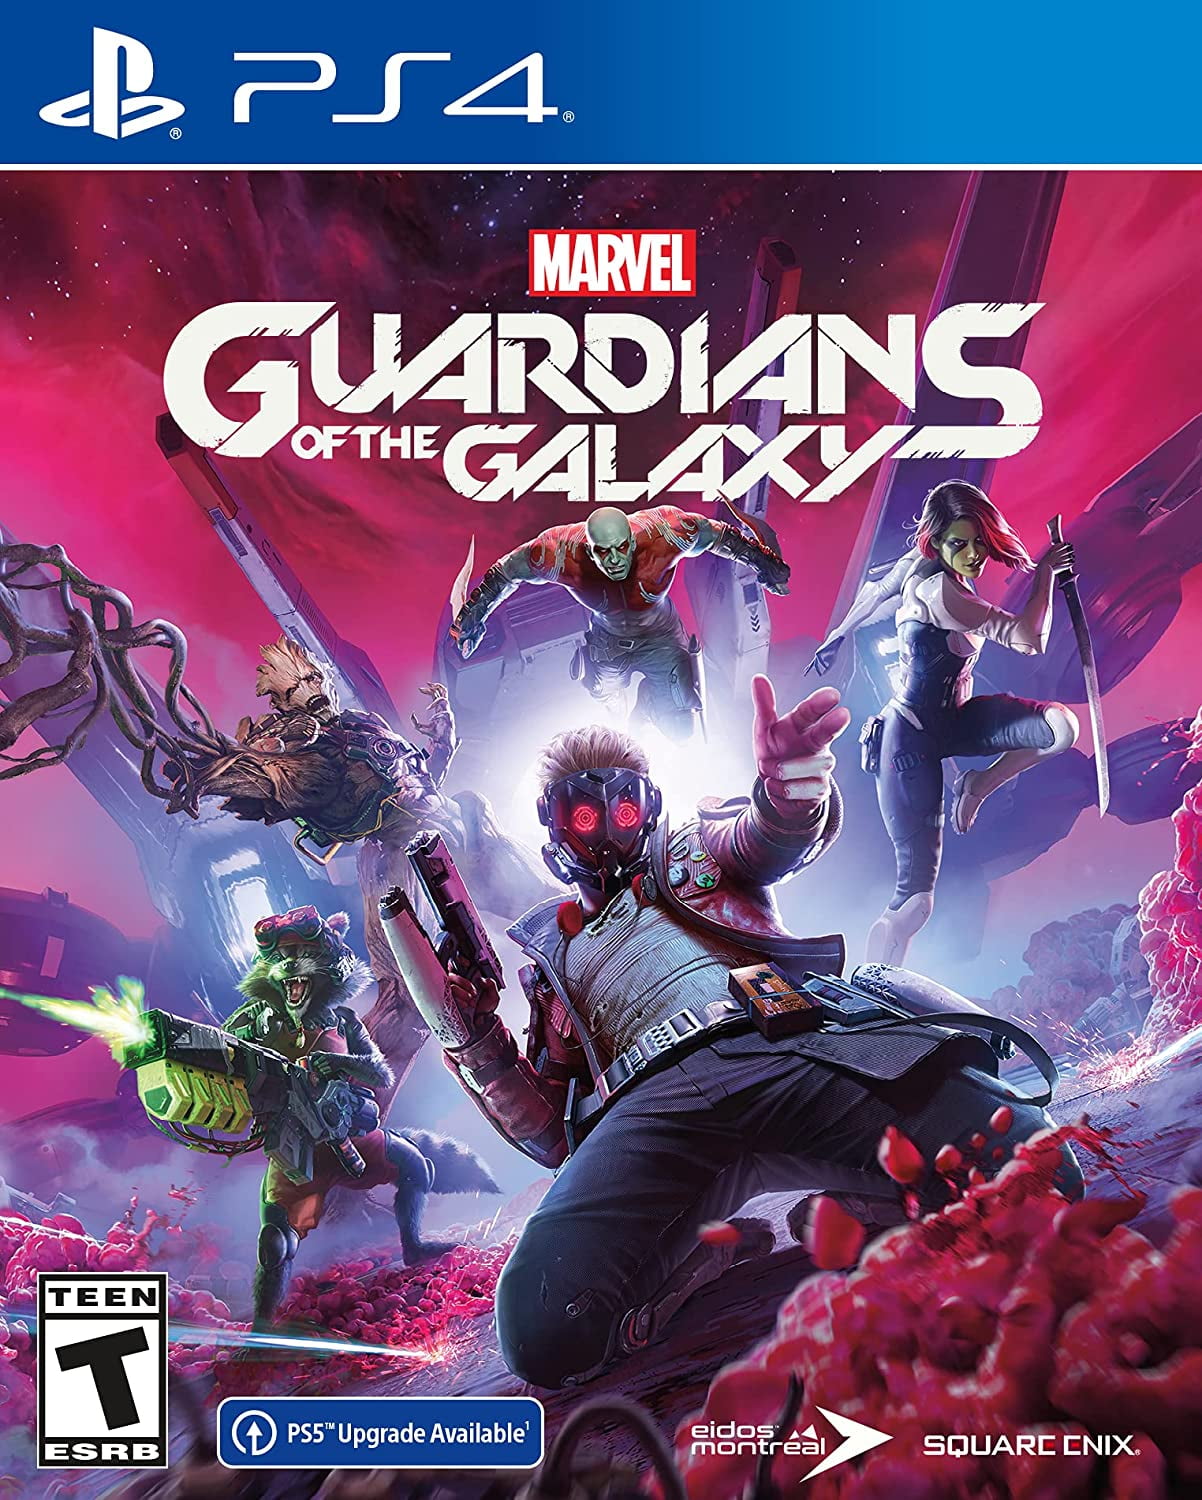 Marvel’s Guardians of the Galaxy, Square Enix, PlayStation 4